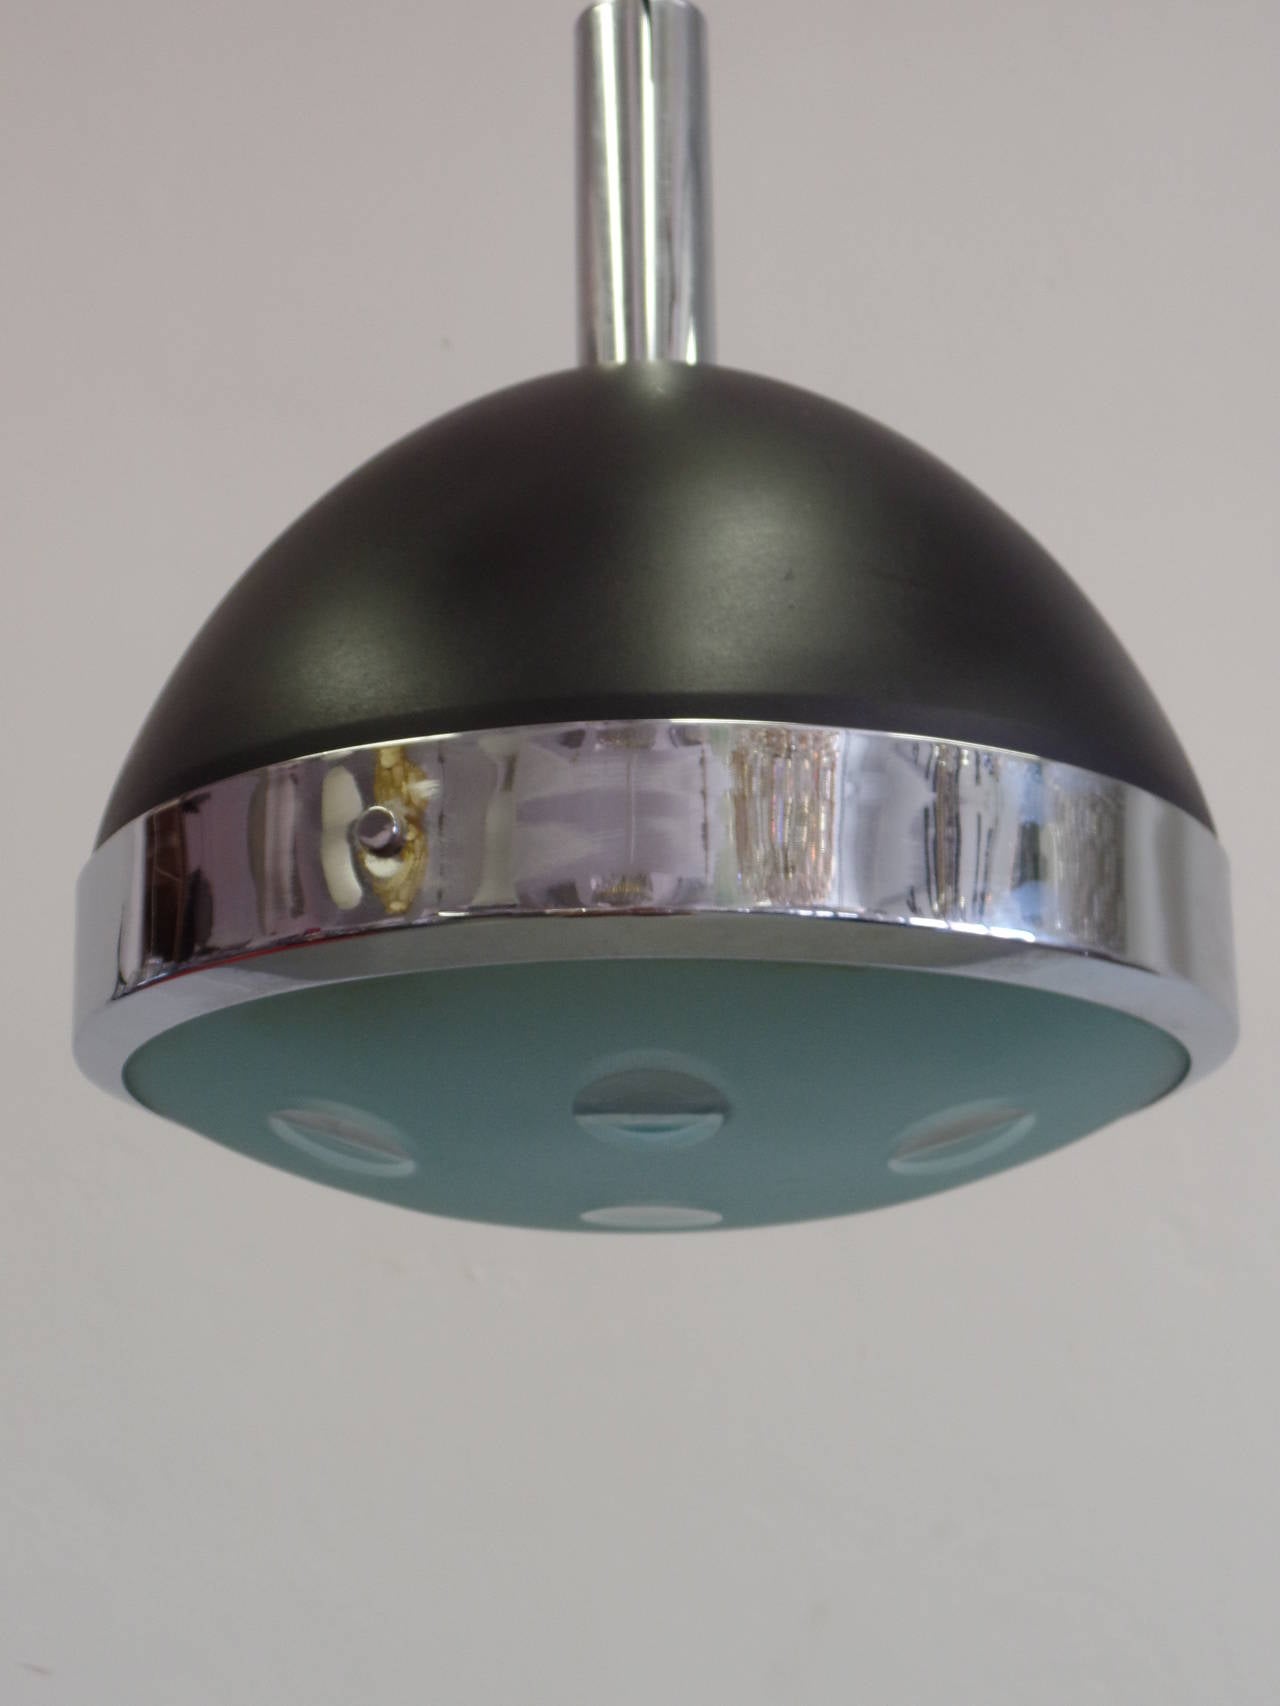 Three elegant Italian Mid-Century Modern pendants or flush mount fixtures by Stilnovo with engraved circular patterns. The frames are enameled black metal with chrome banding and detailing. 

Height of fixture alone is 14